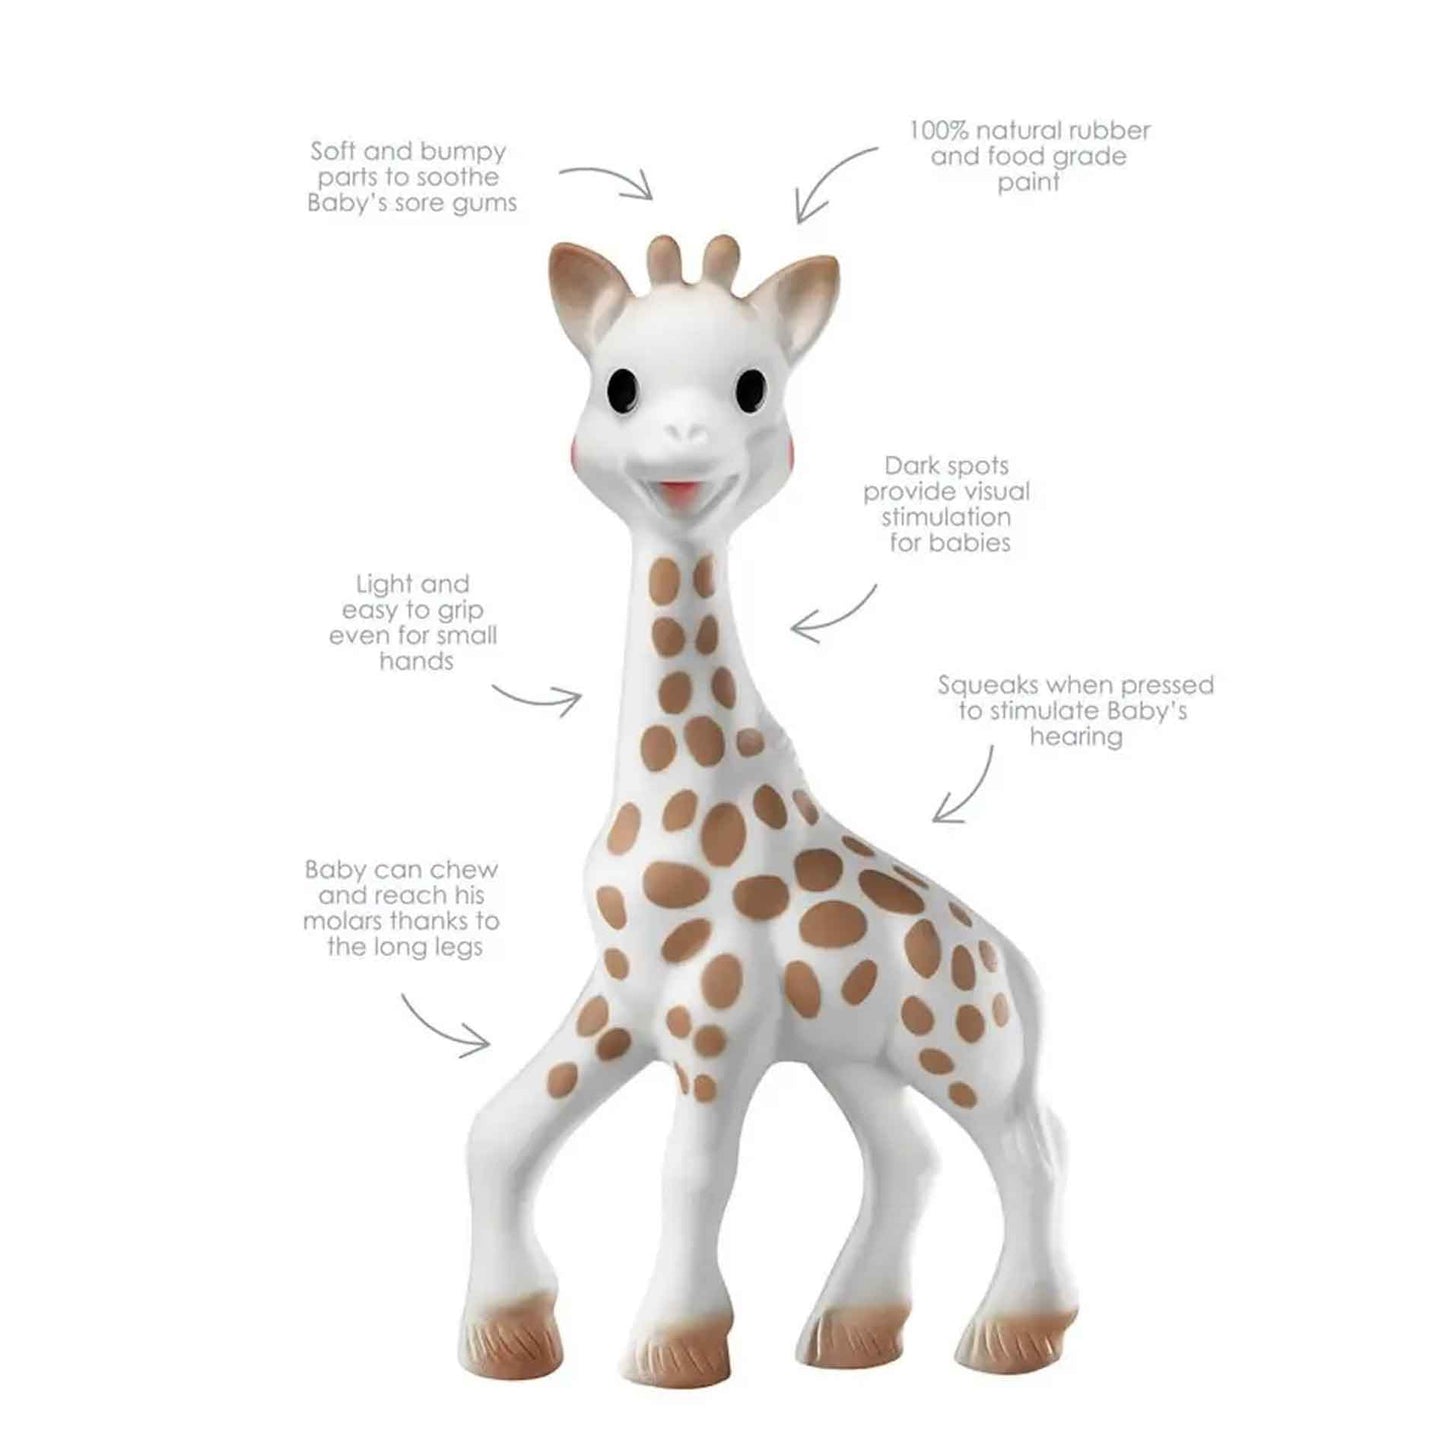 Sophie La Girafe White Box Classic Baby Teether product detail specification shot for South Hous.